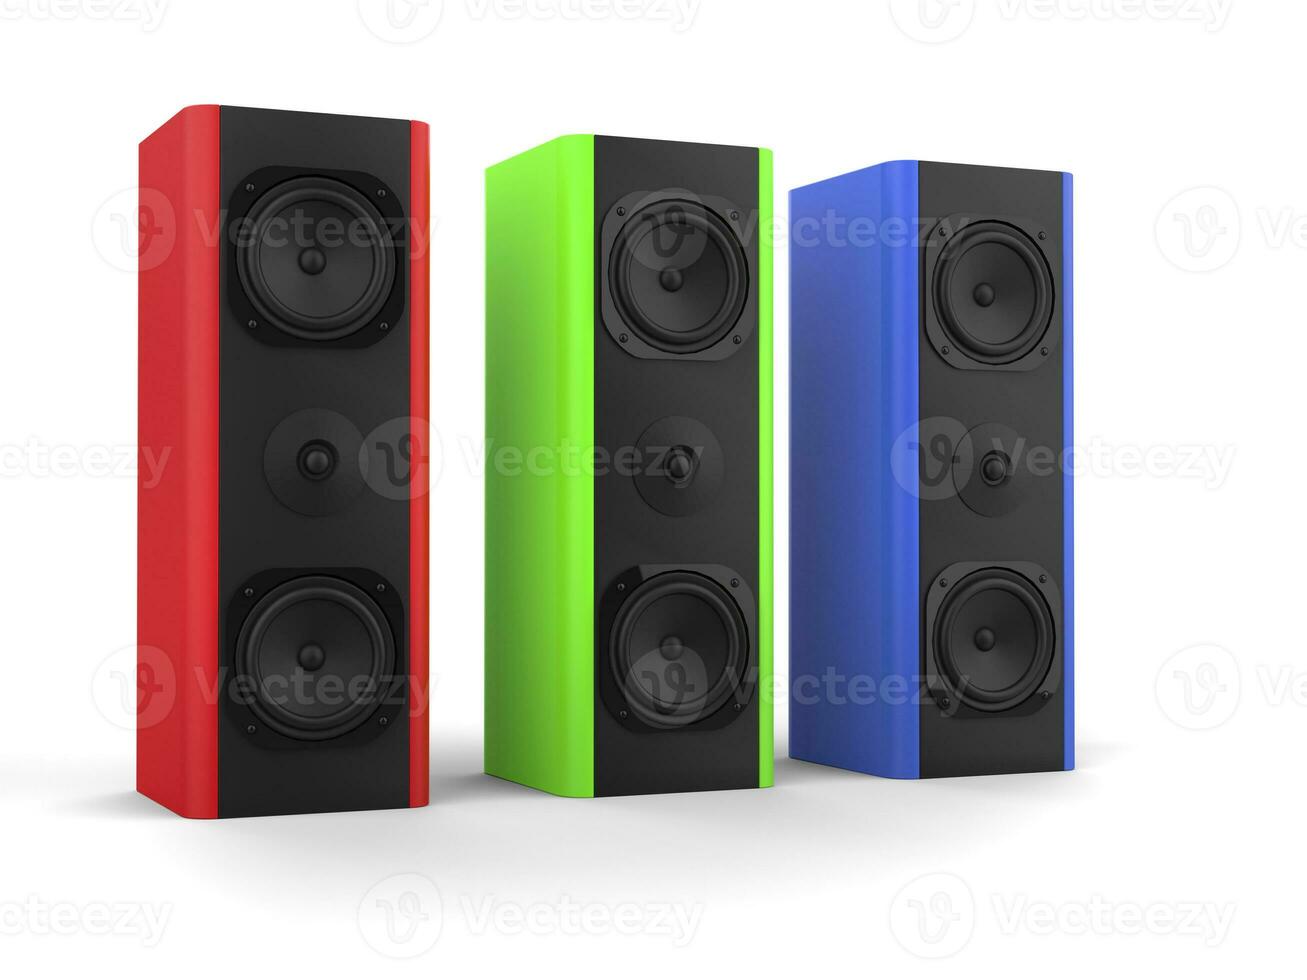 Modern music speakers with red, green and blue side panels photo